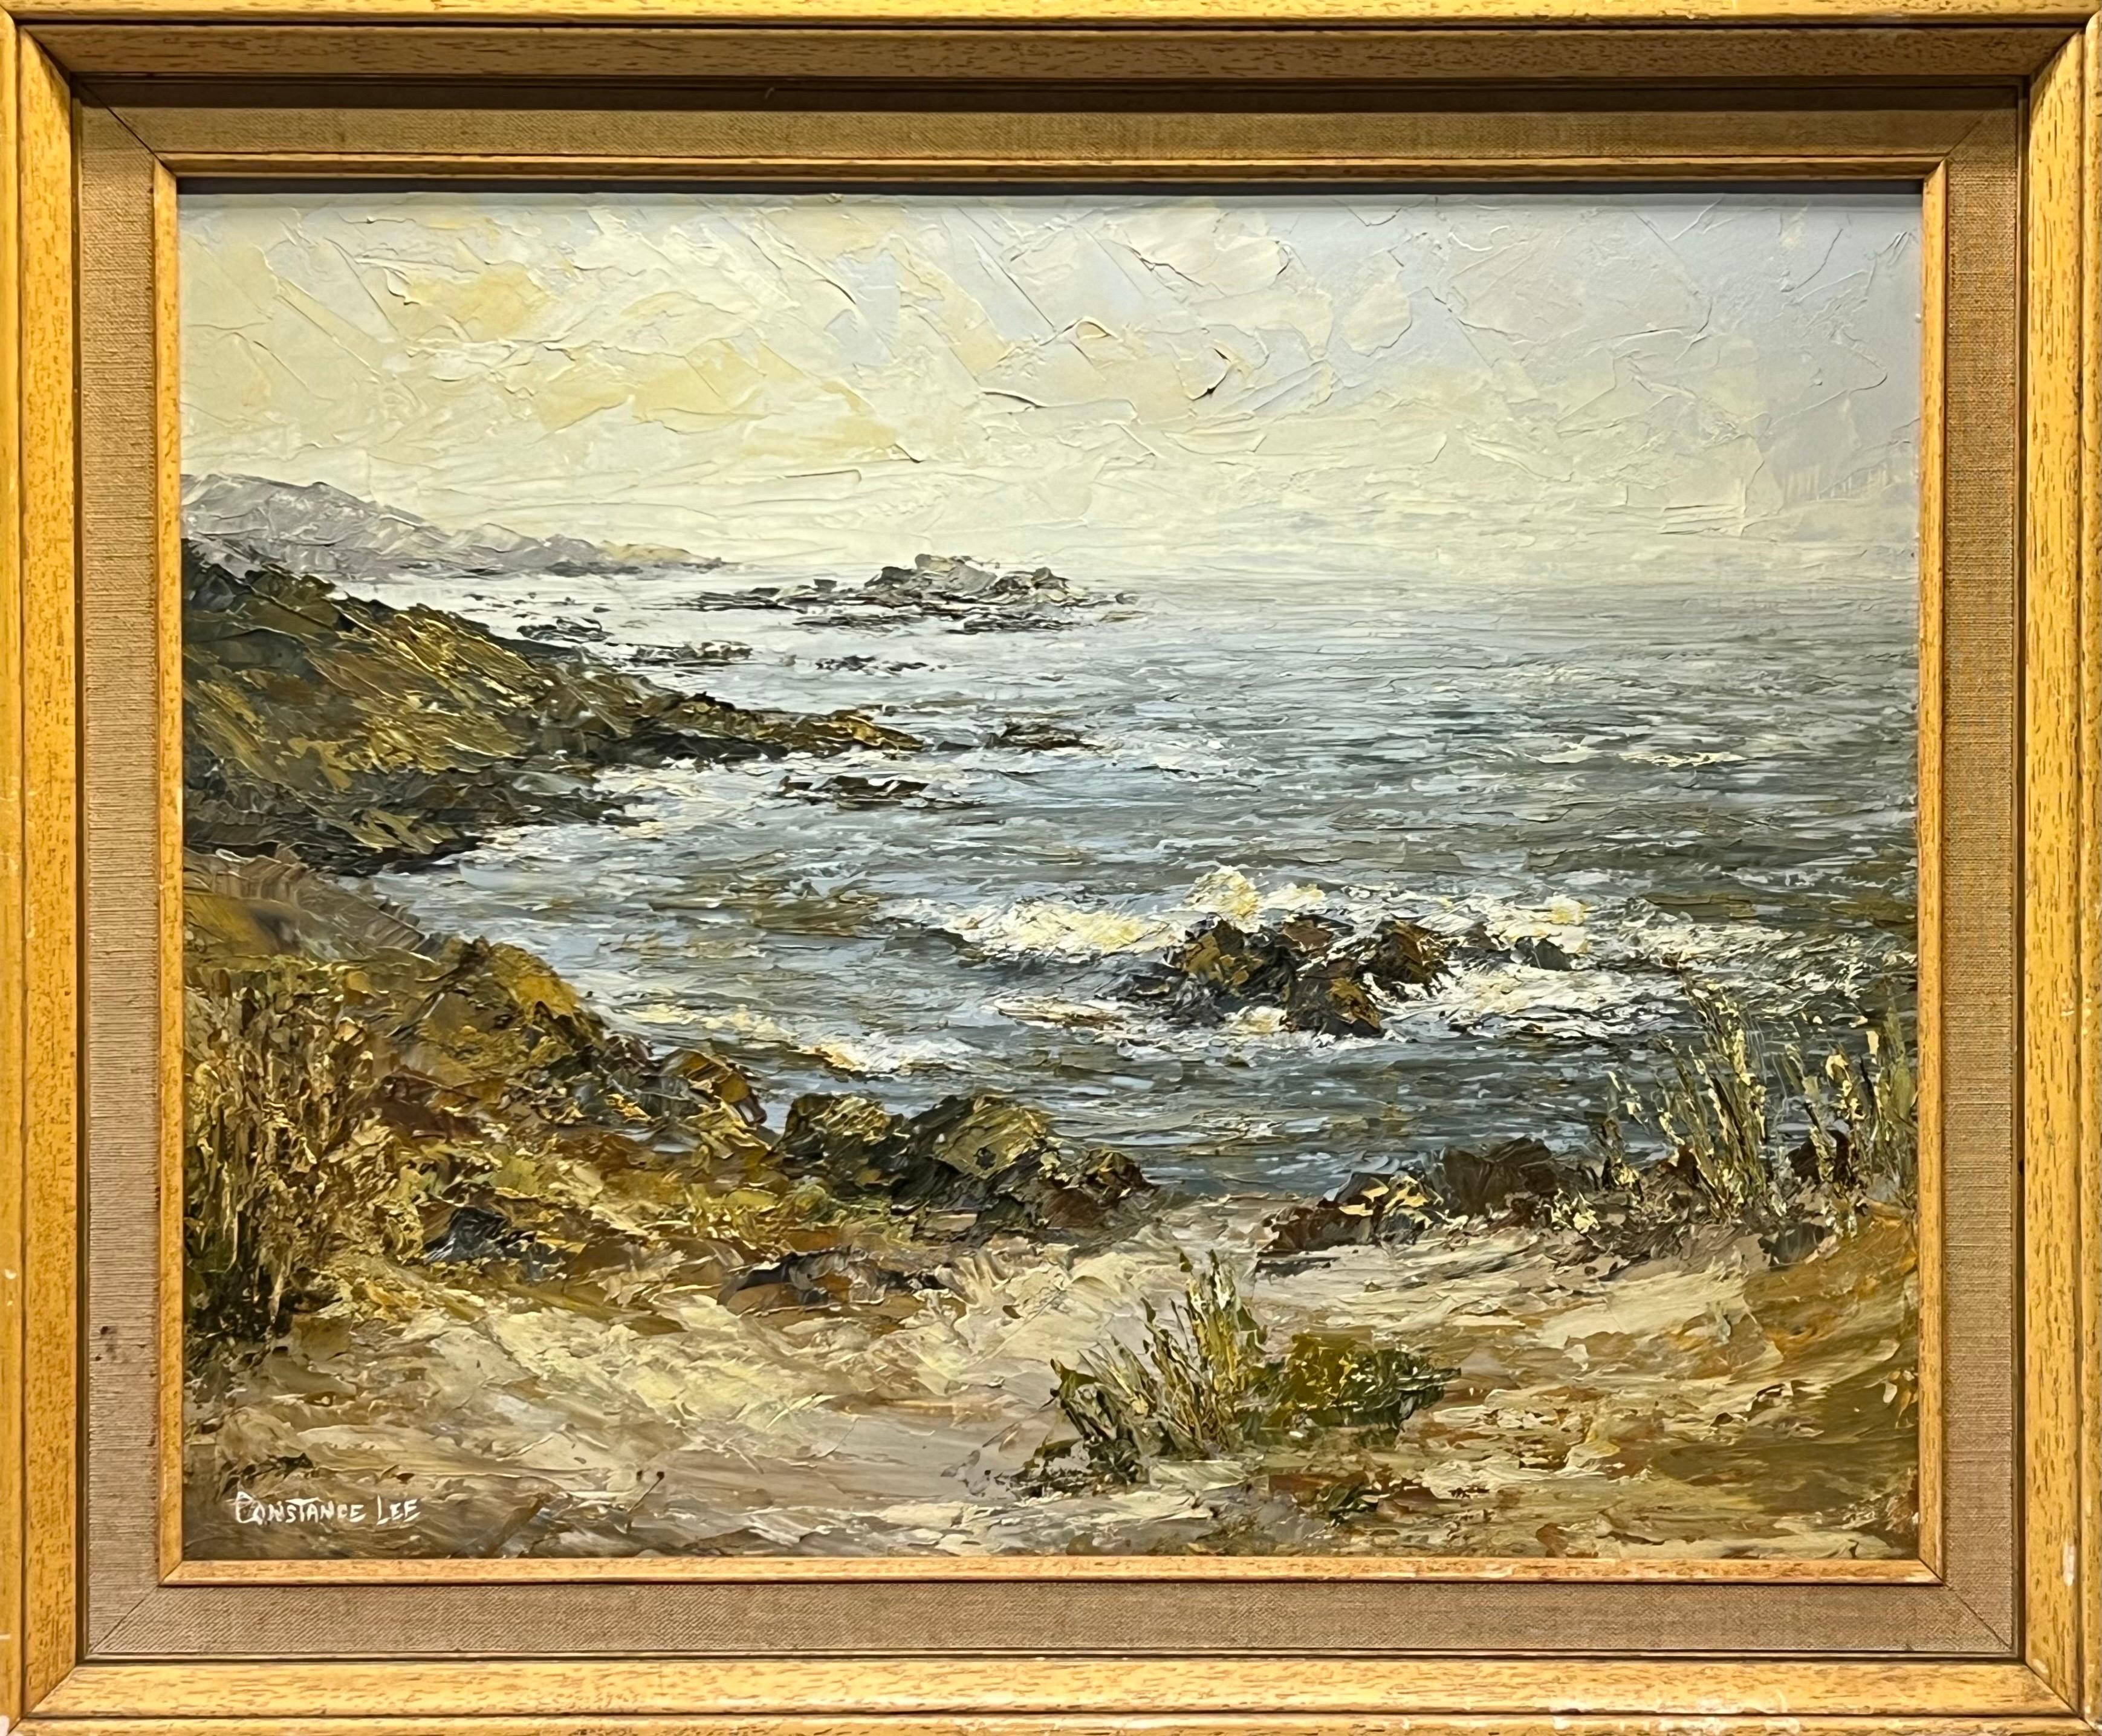 Constance Lee Abstract Painting - Californian Coastline Seascape Landscape Impasto Painting by 20th Century Artist